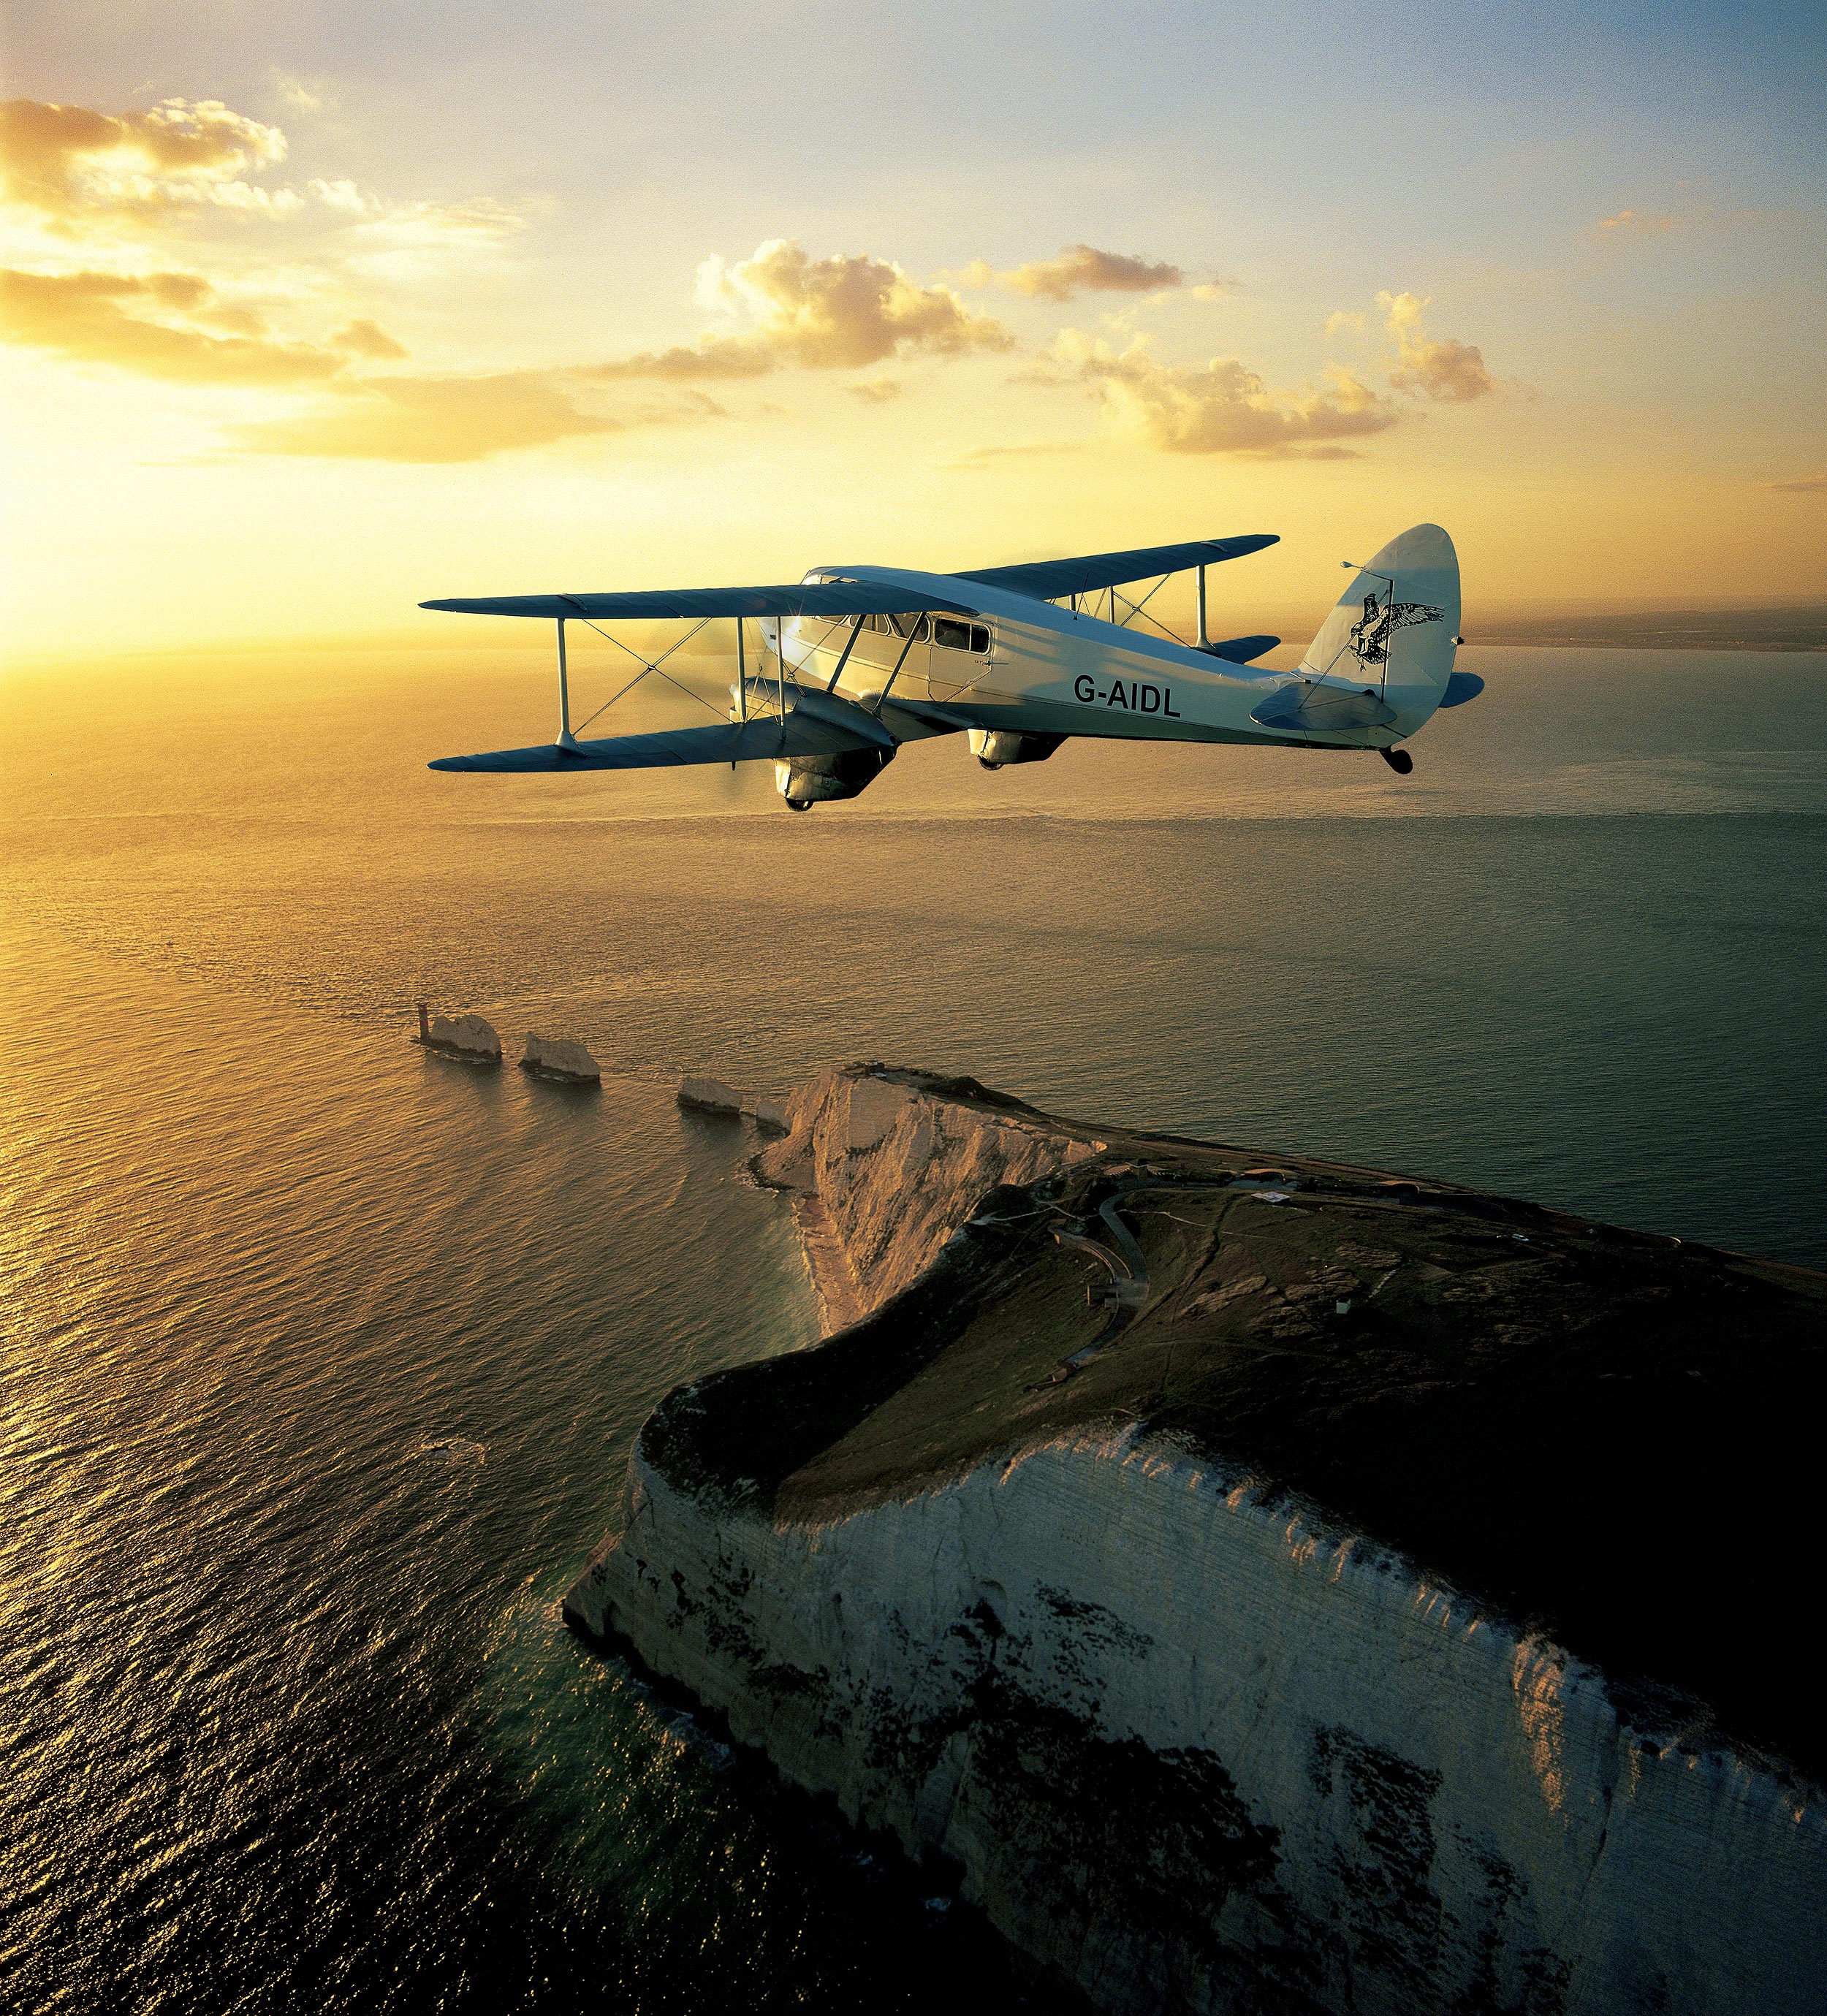 Evening flight from Goodwood over The Needles, UK.  Aerial photography by Mike Caldwell